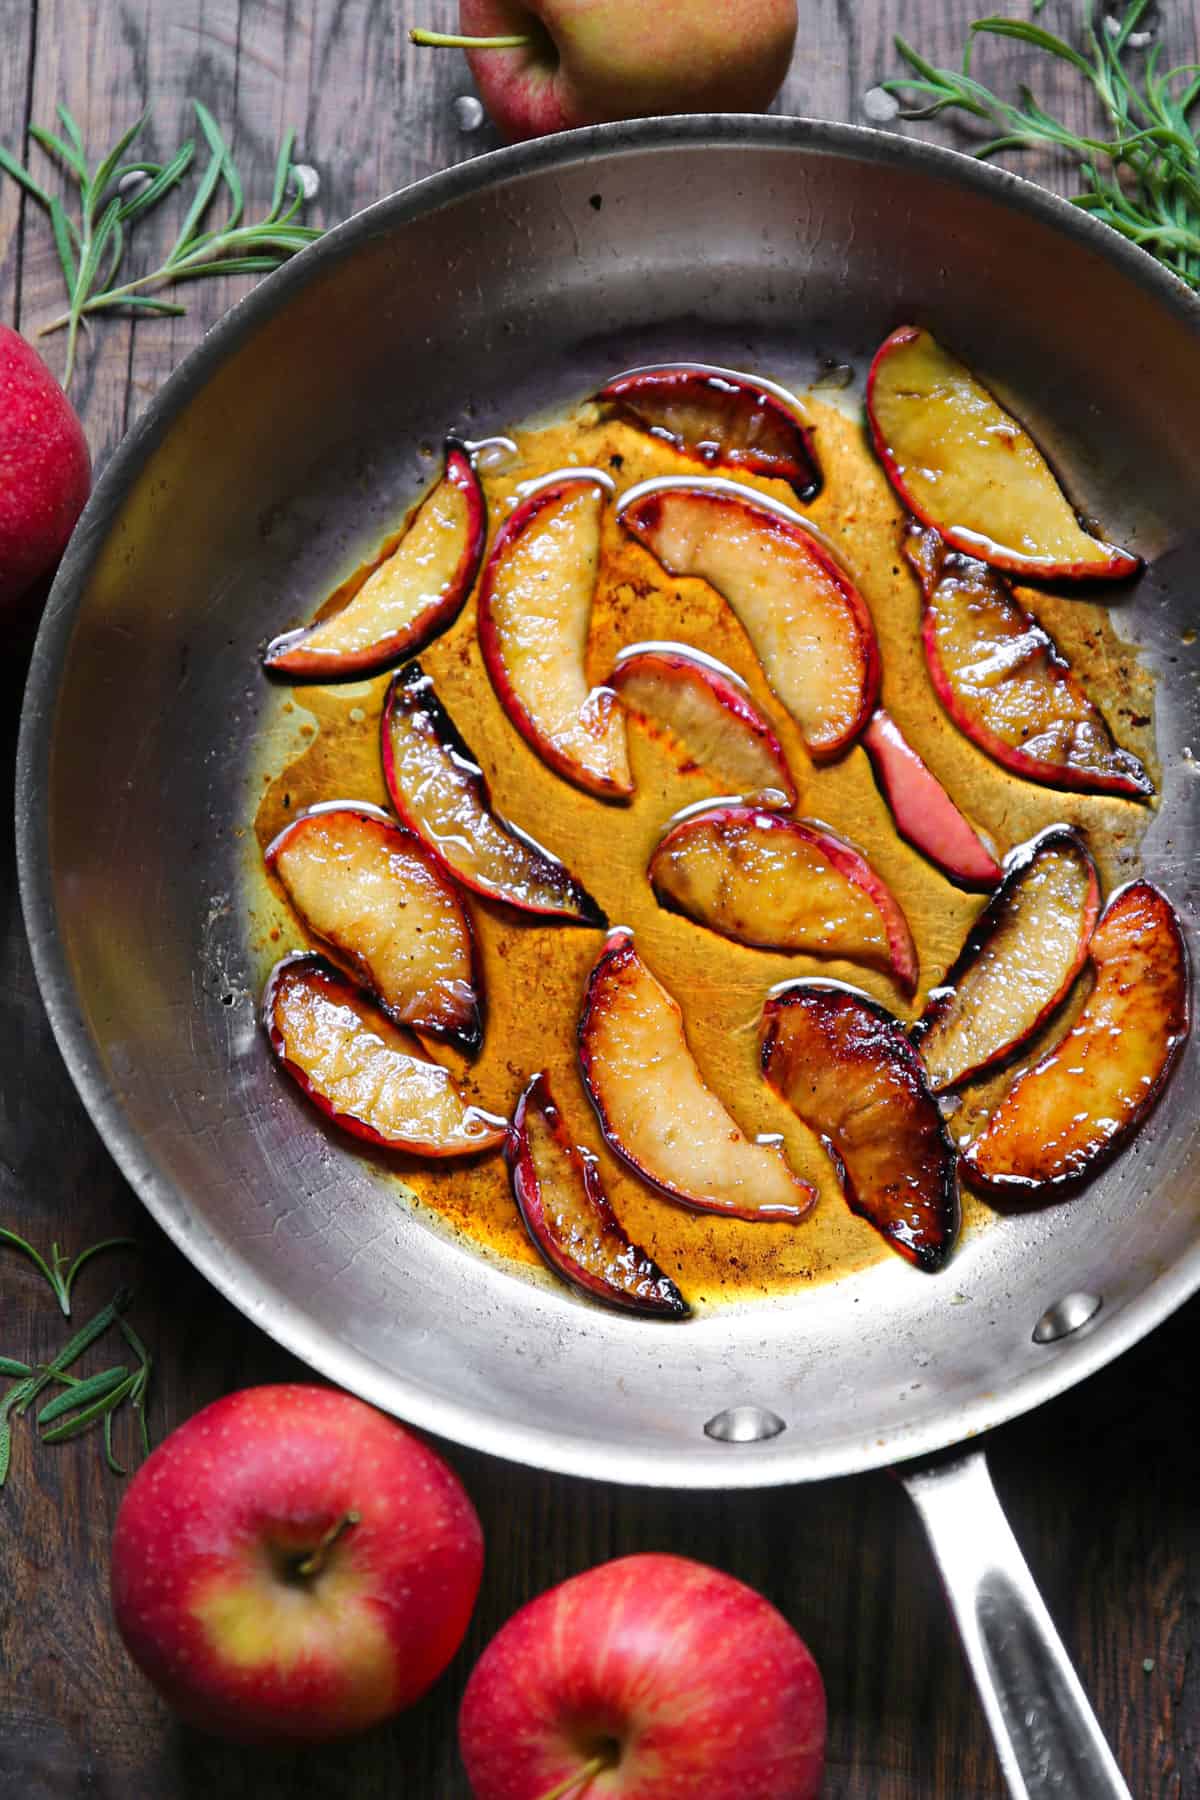 cooked apple slices in a stainless steel skillet